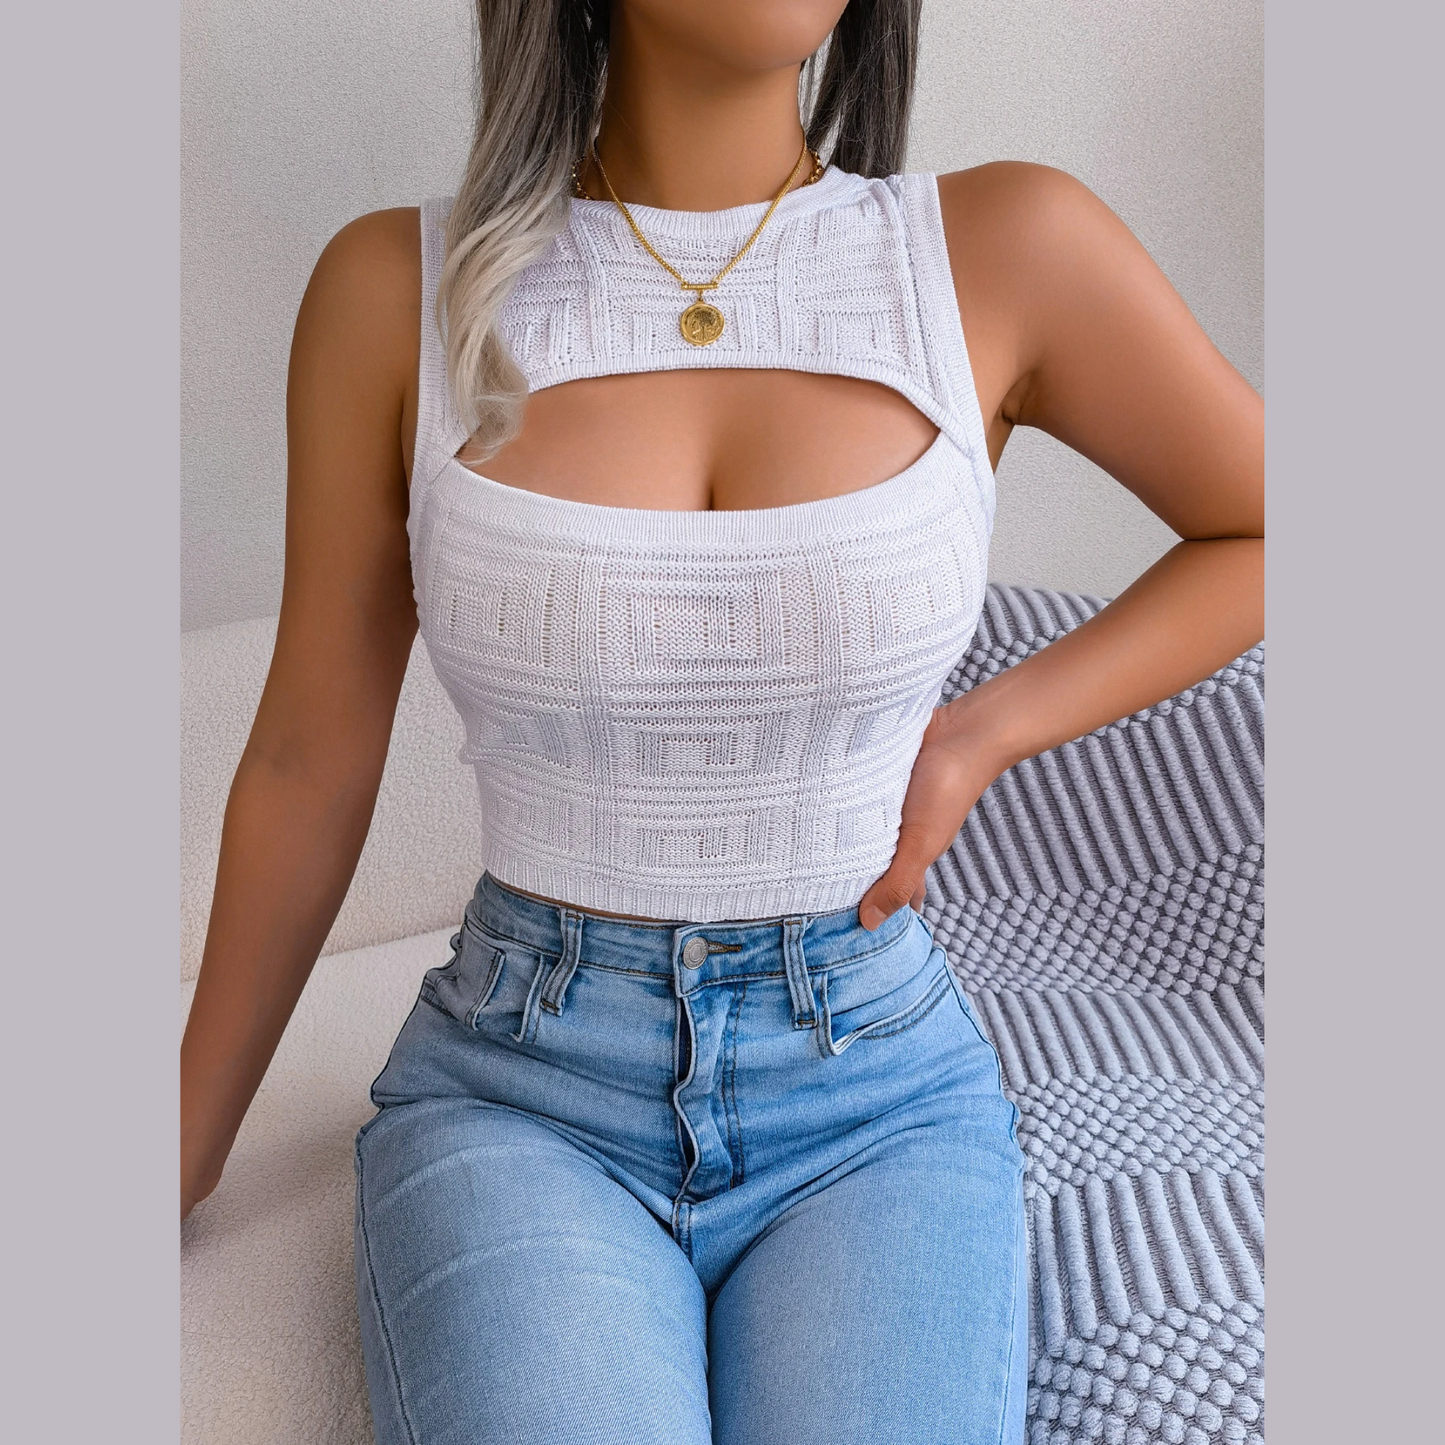 Christiana - White Knitted Cut Out Crop Top